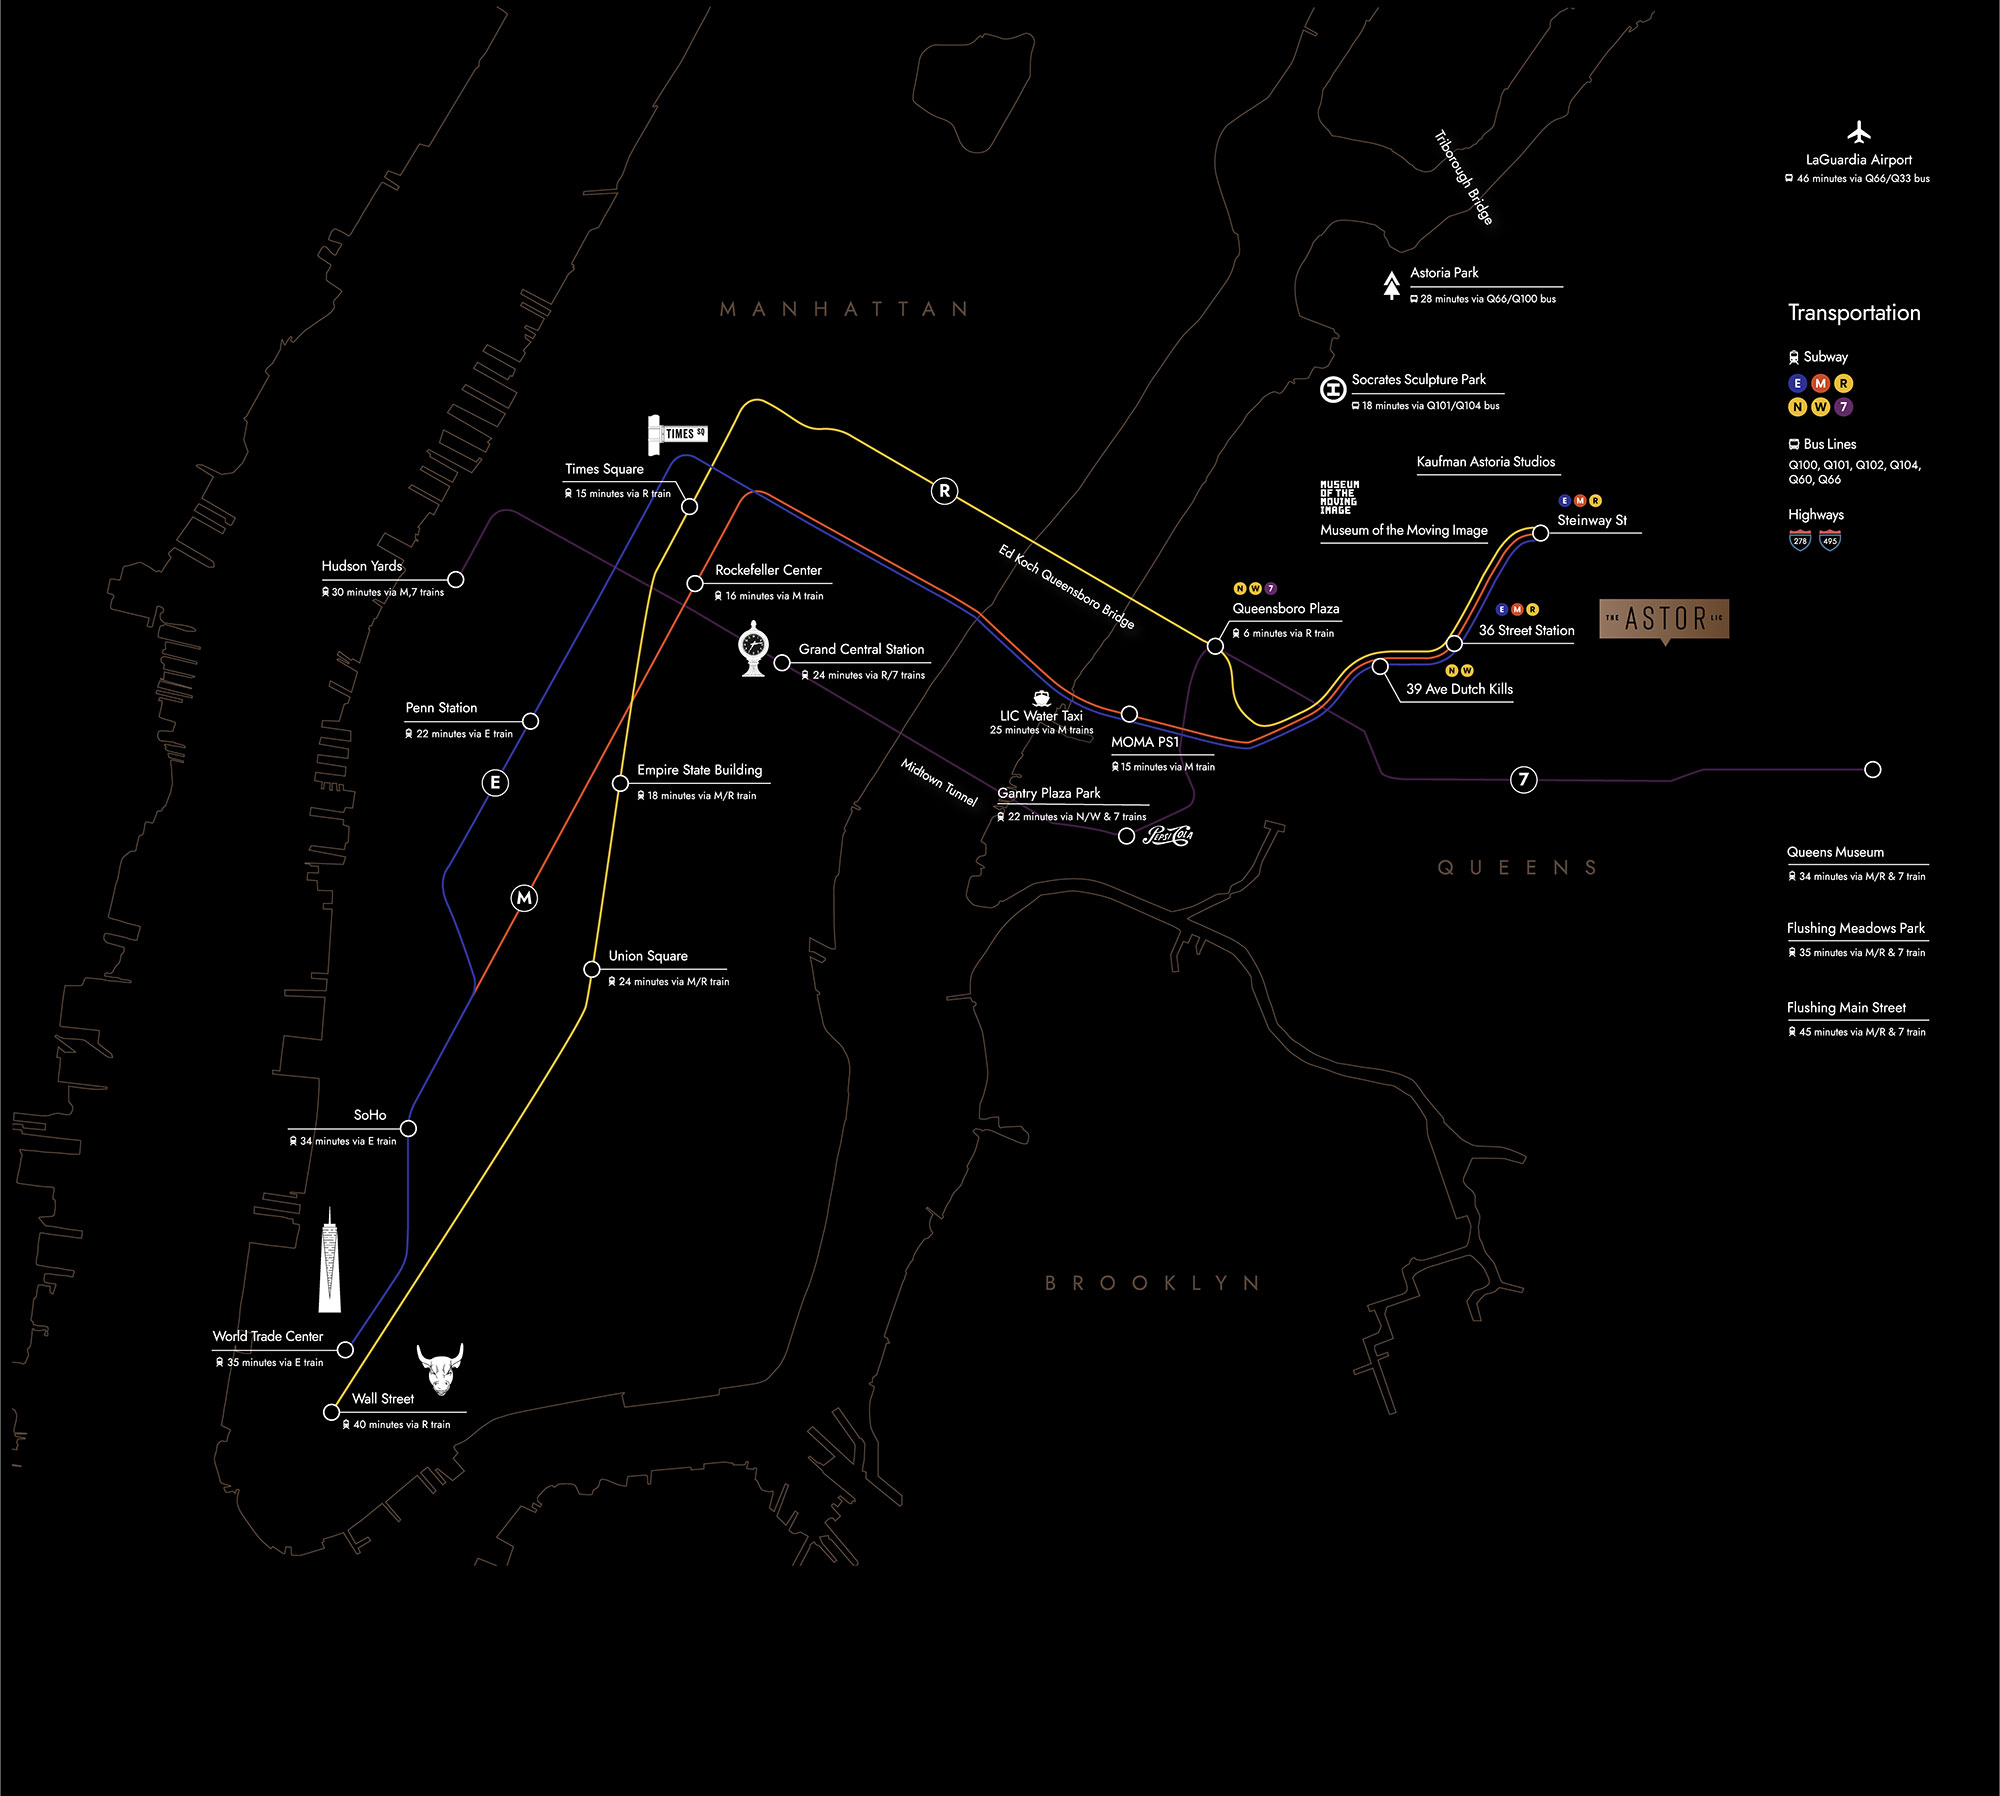 Illustrated transportation map on black background highlighting points of interest along with subway, bus and more including transportation times